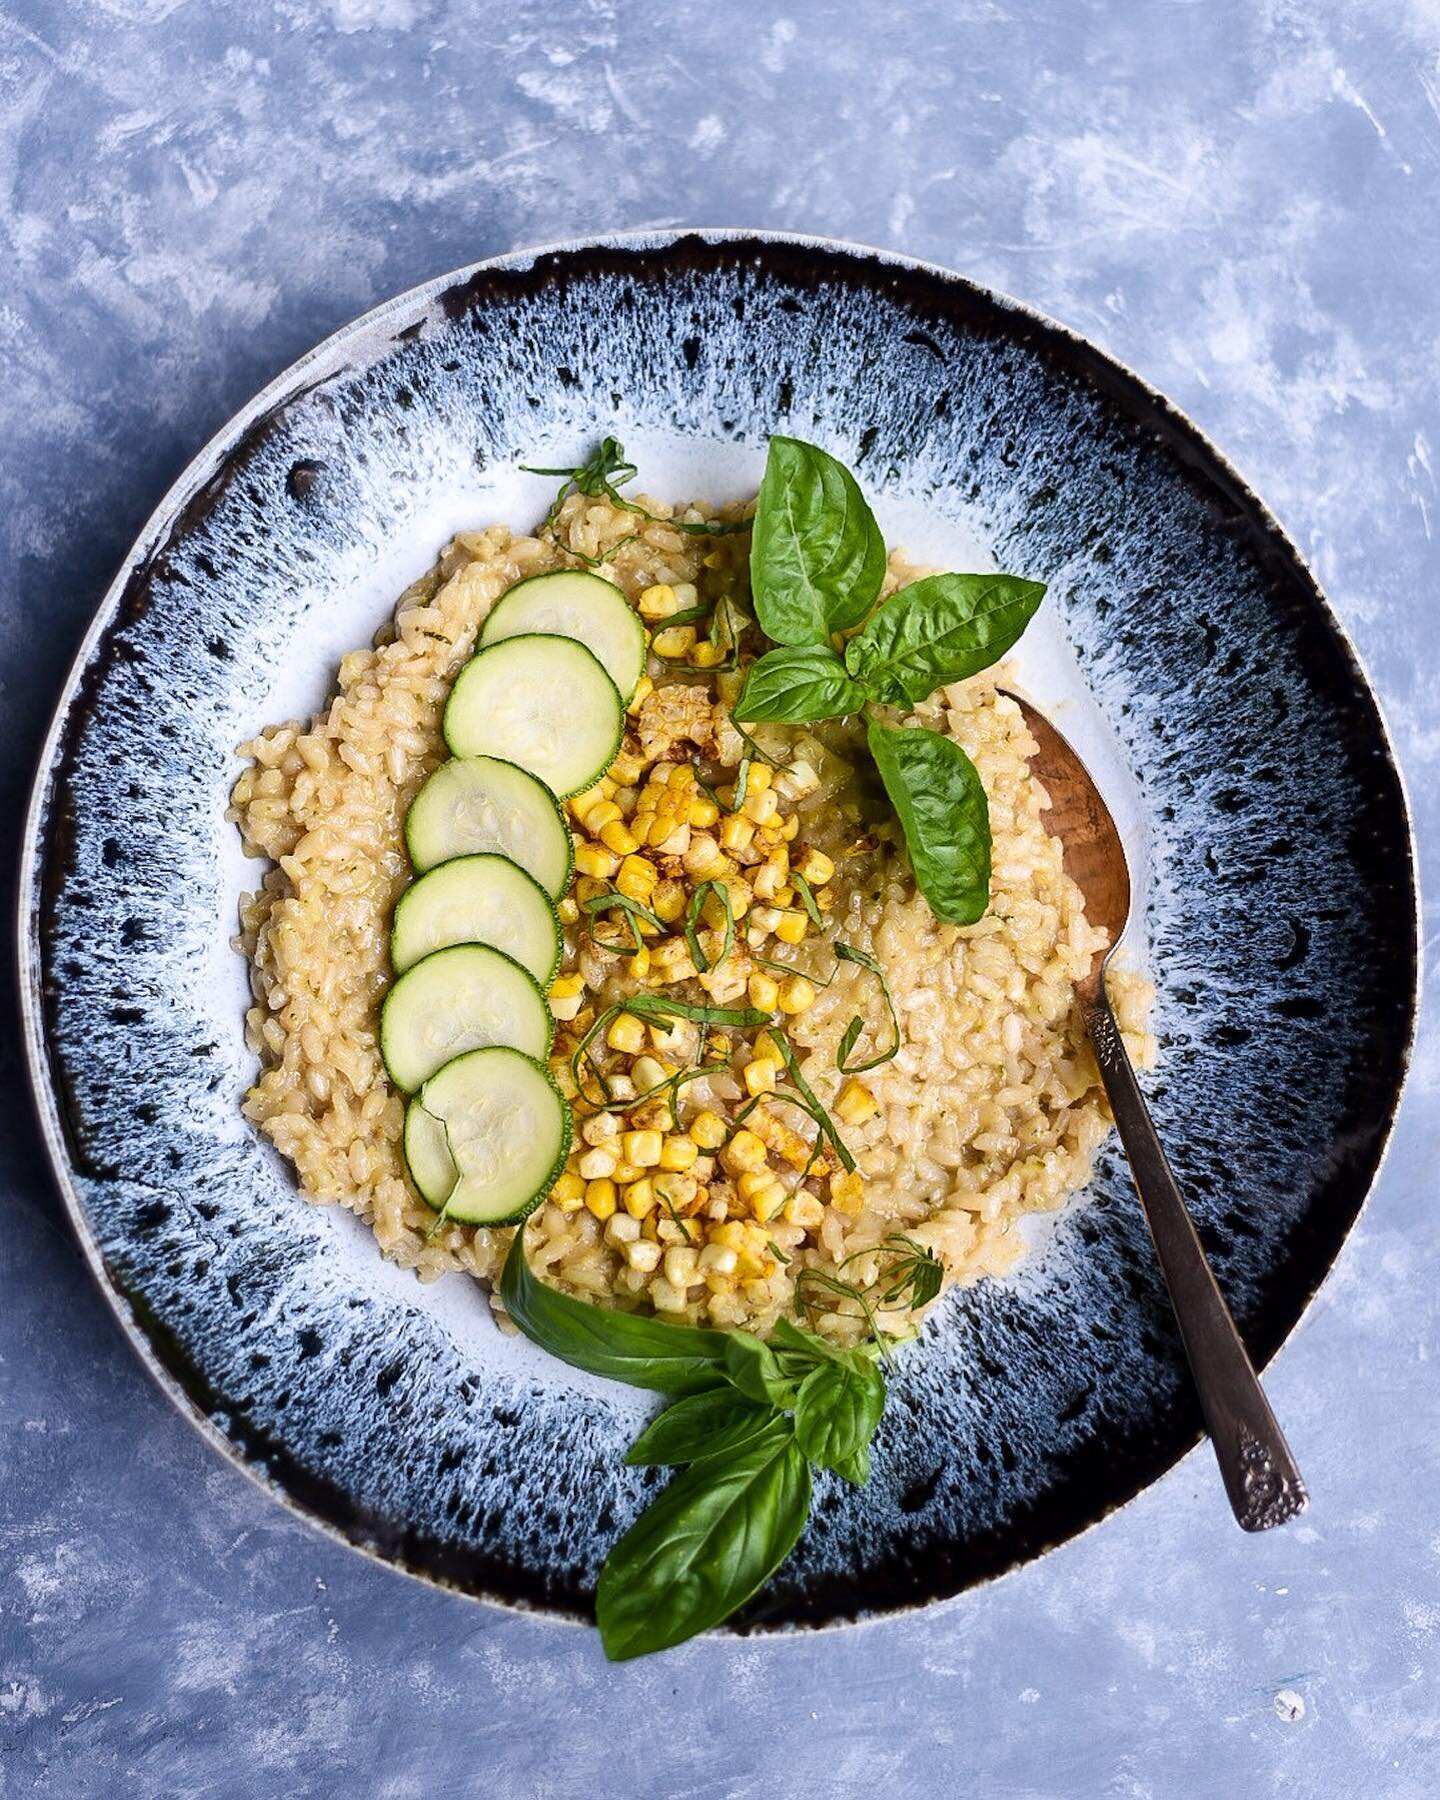 🤩 S U M M E R  R I S O T T O 🤩

I was inspired and I had some time yesterday morning. So I made risotto with #homemade chicken stock. Added in grated zucchini, butter saut&eacute;ed corn and a smidge of #danish Gouda. And, lots of basil from the ga